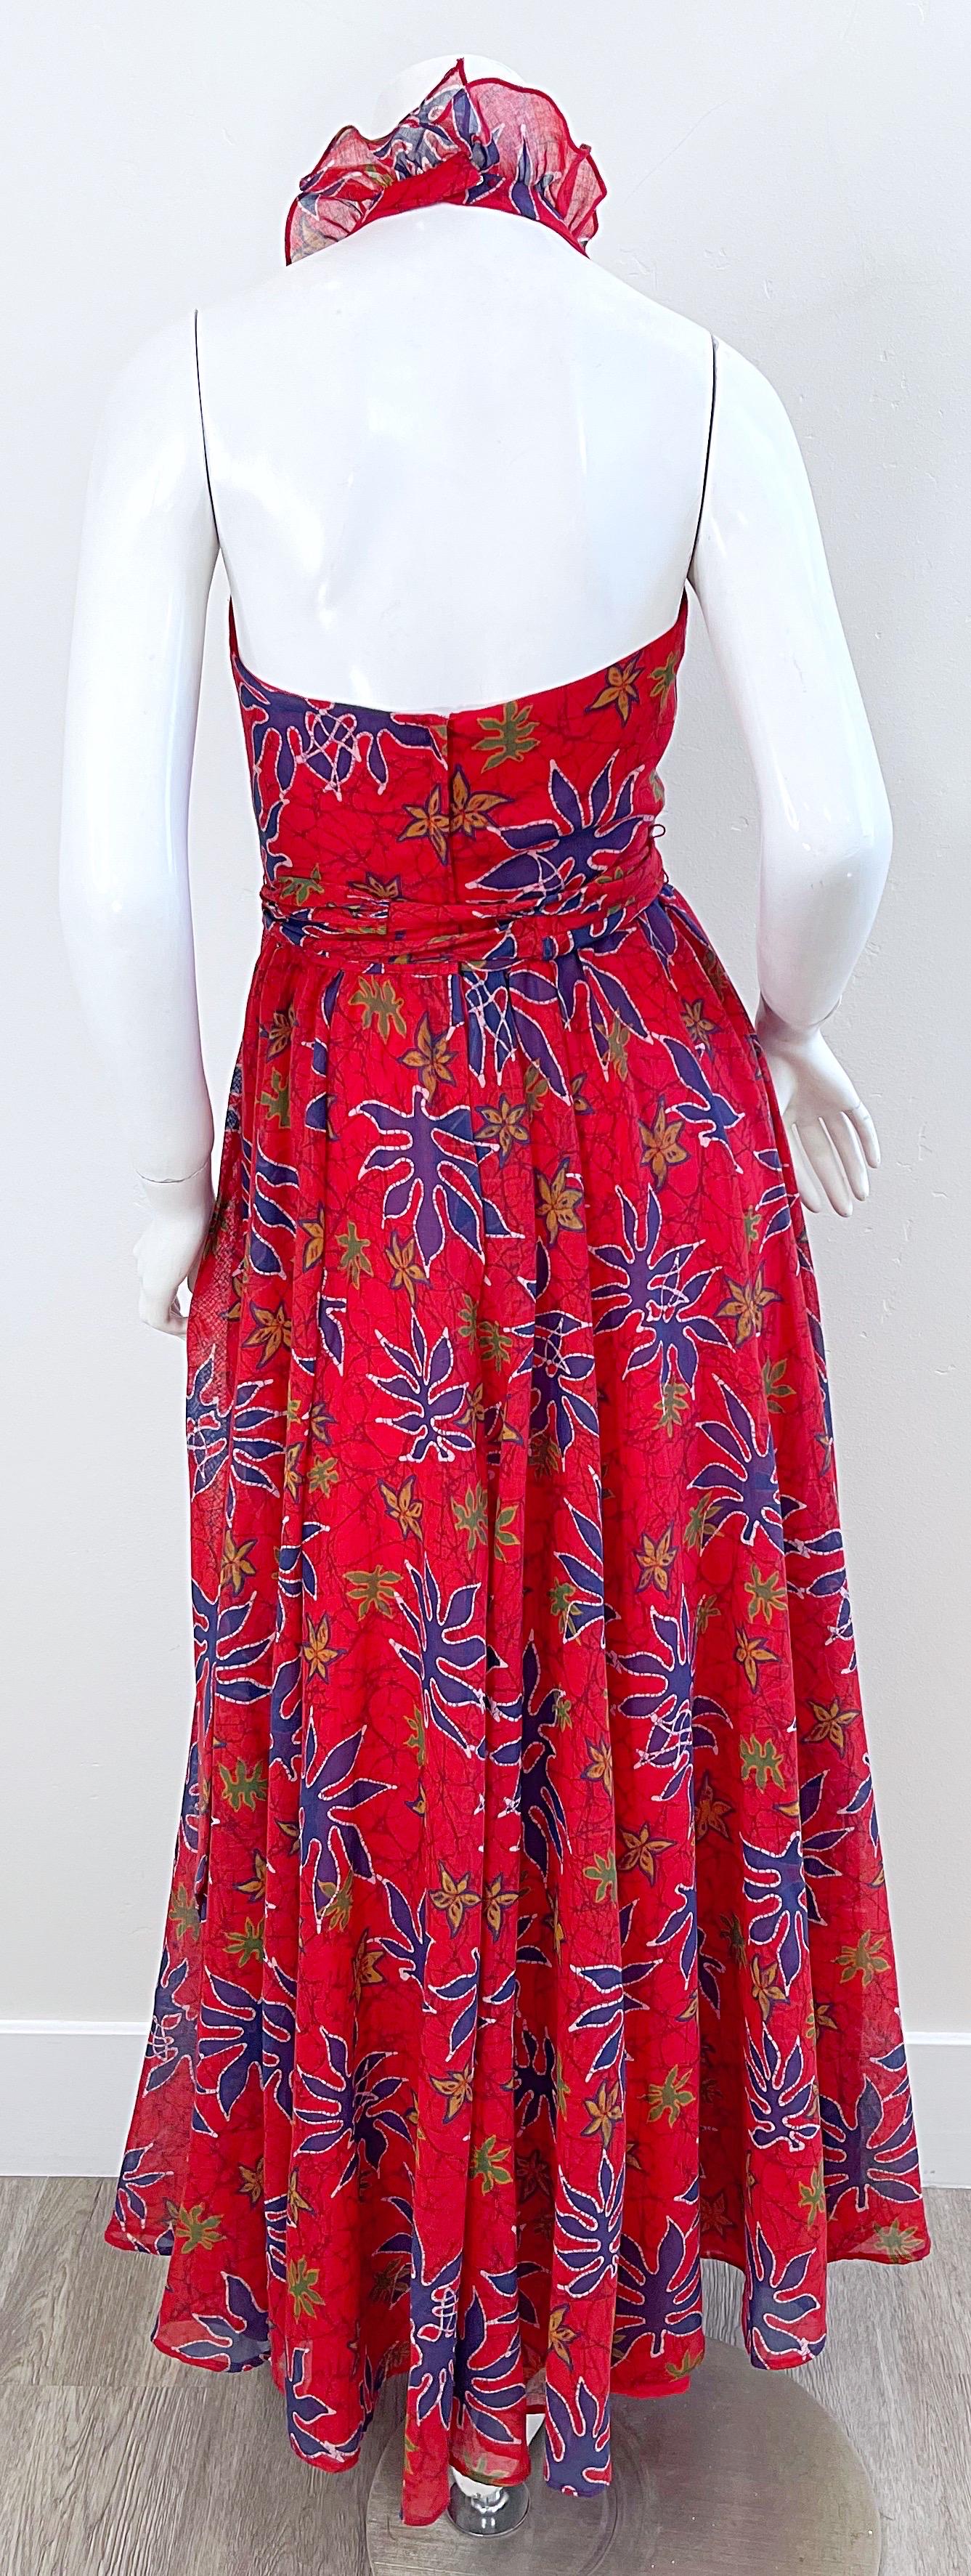 Lilli Diamond 1970s Sz 2 Abstract Leaf Print Red Halter Cotton Voile Maxi Dress For Sale 4